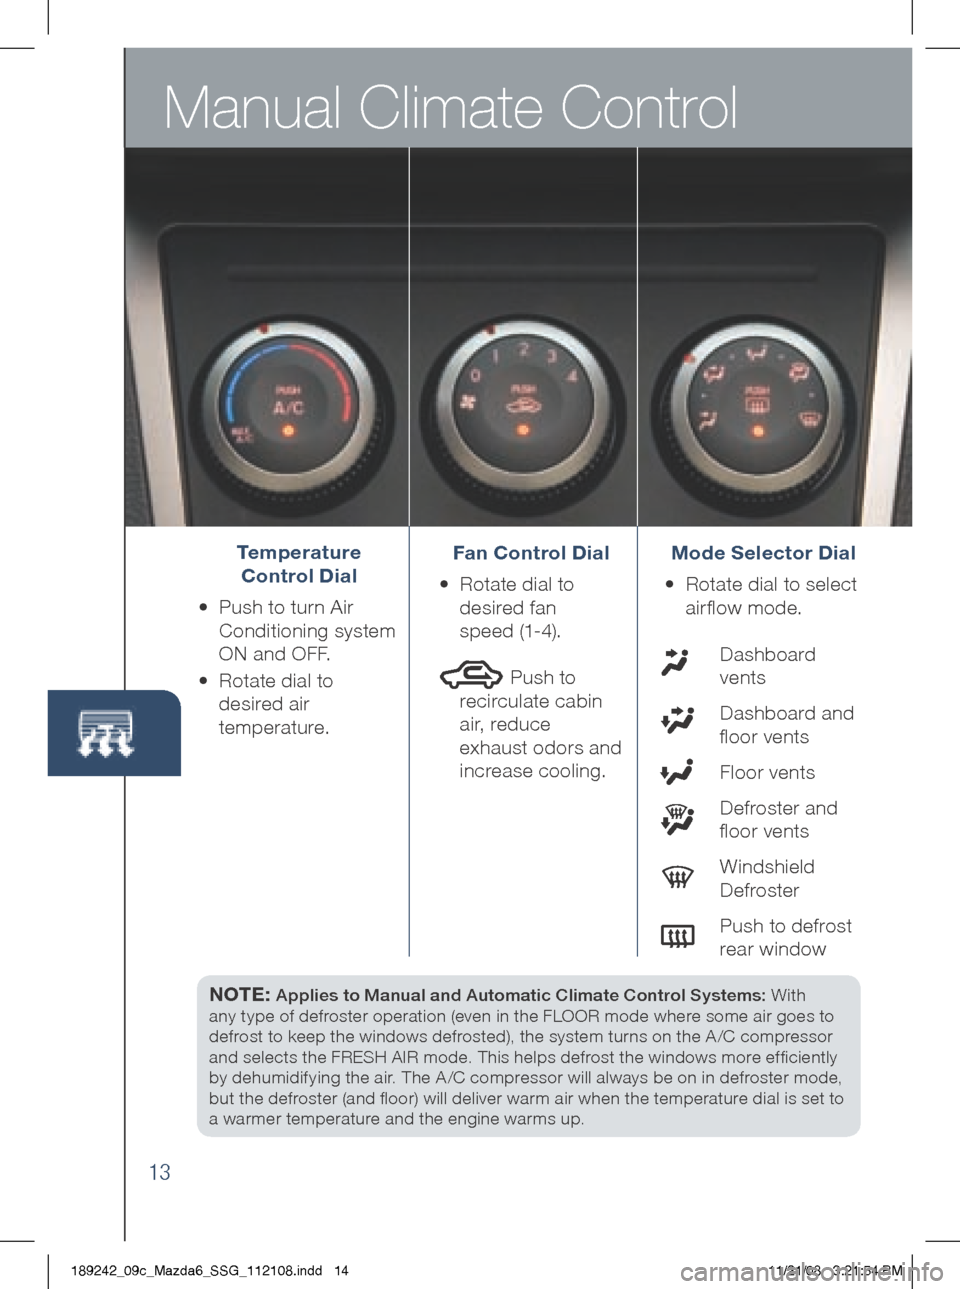 MAZDA MODEL 6 2009  Smart Start Guide (in English) Manual Climate Control
13
NOTE: Applies to Manual and Automatic Climate Control Systems: With	
any	type	of	defroster	operation	(even	in	the	FLOOR	mode	where	some	air	goes	to 	
defrost	to	keep	the	wind